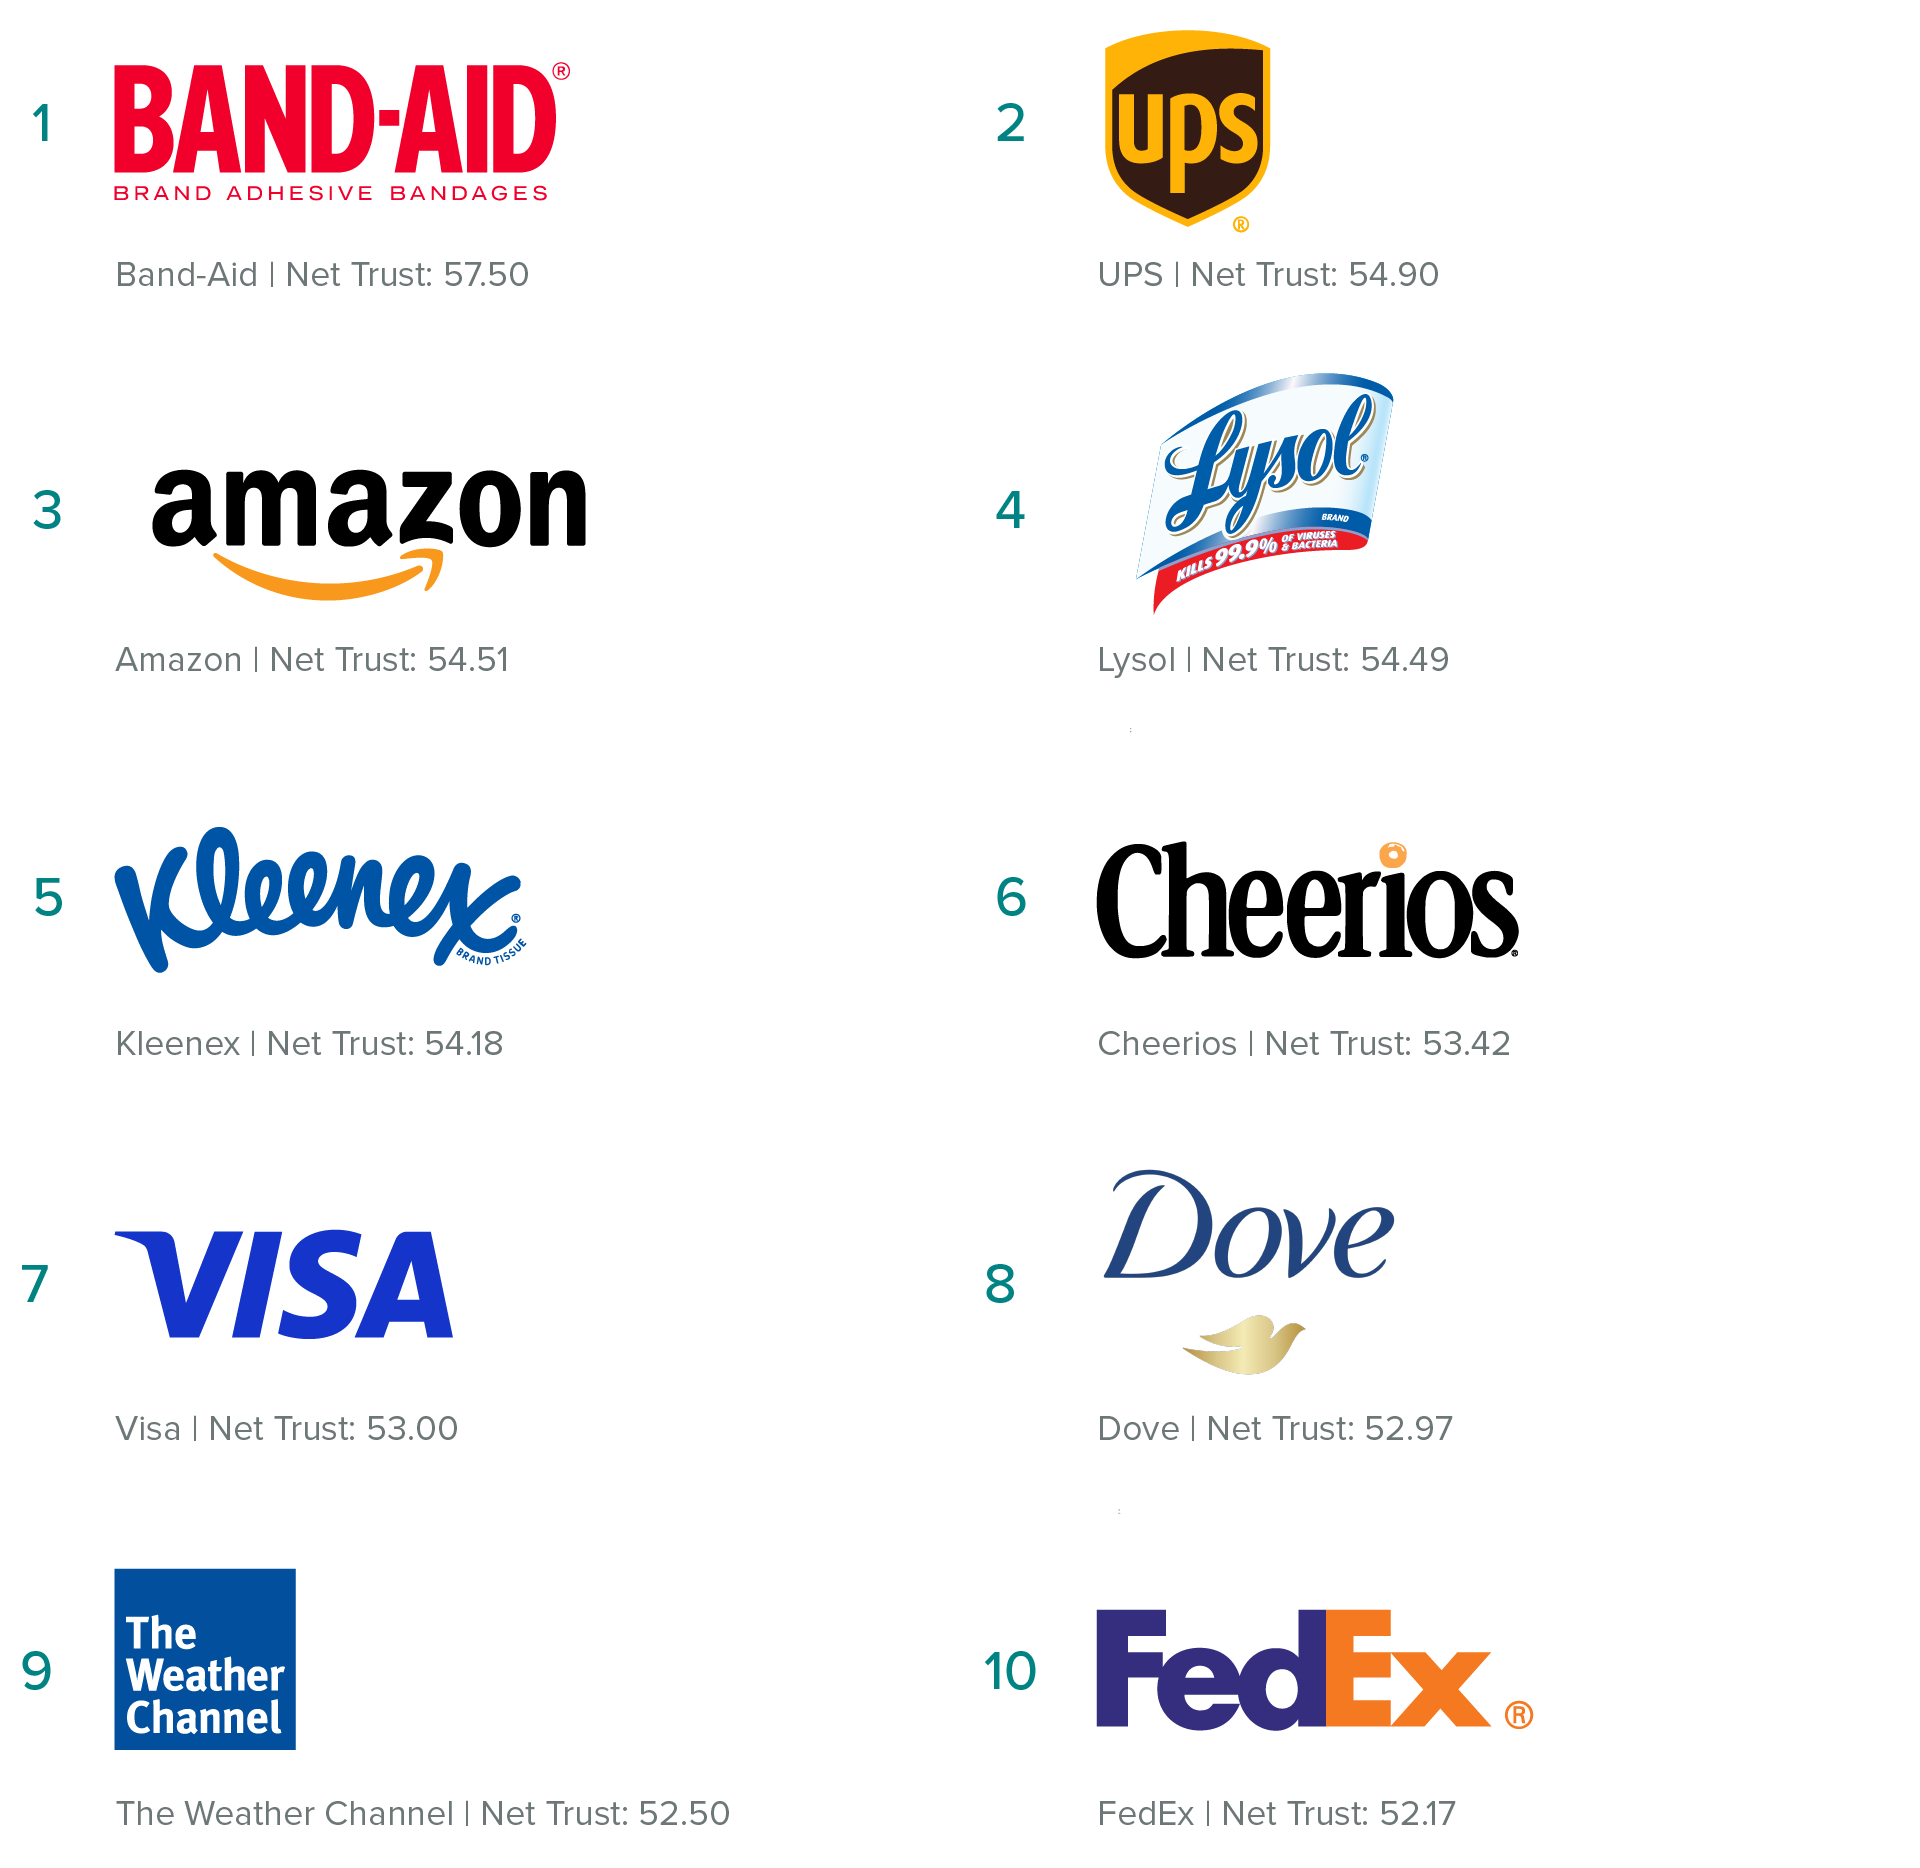 The 10 Most Trusted Brands in the United States